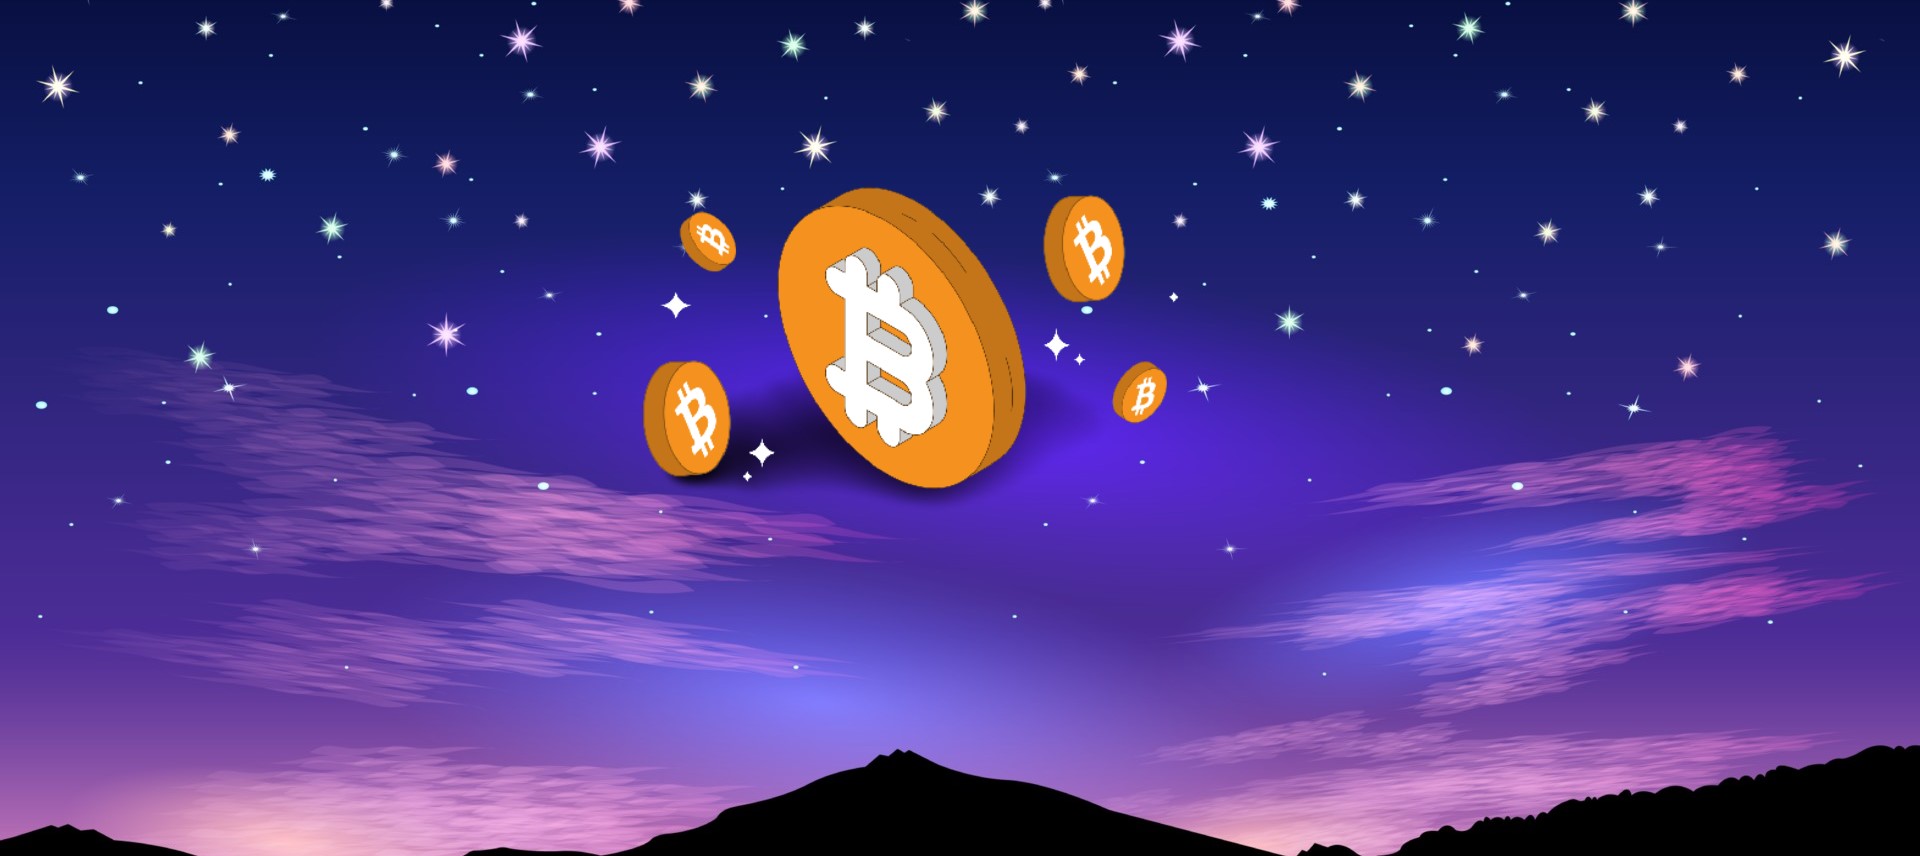 Bitcoin Price Predicts Rise to $50,000 in 2023 and $120,000 by 2024
